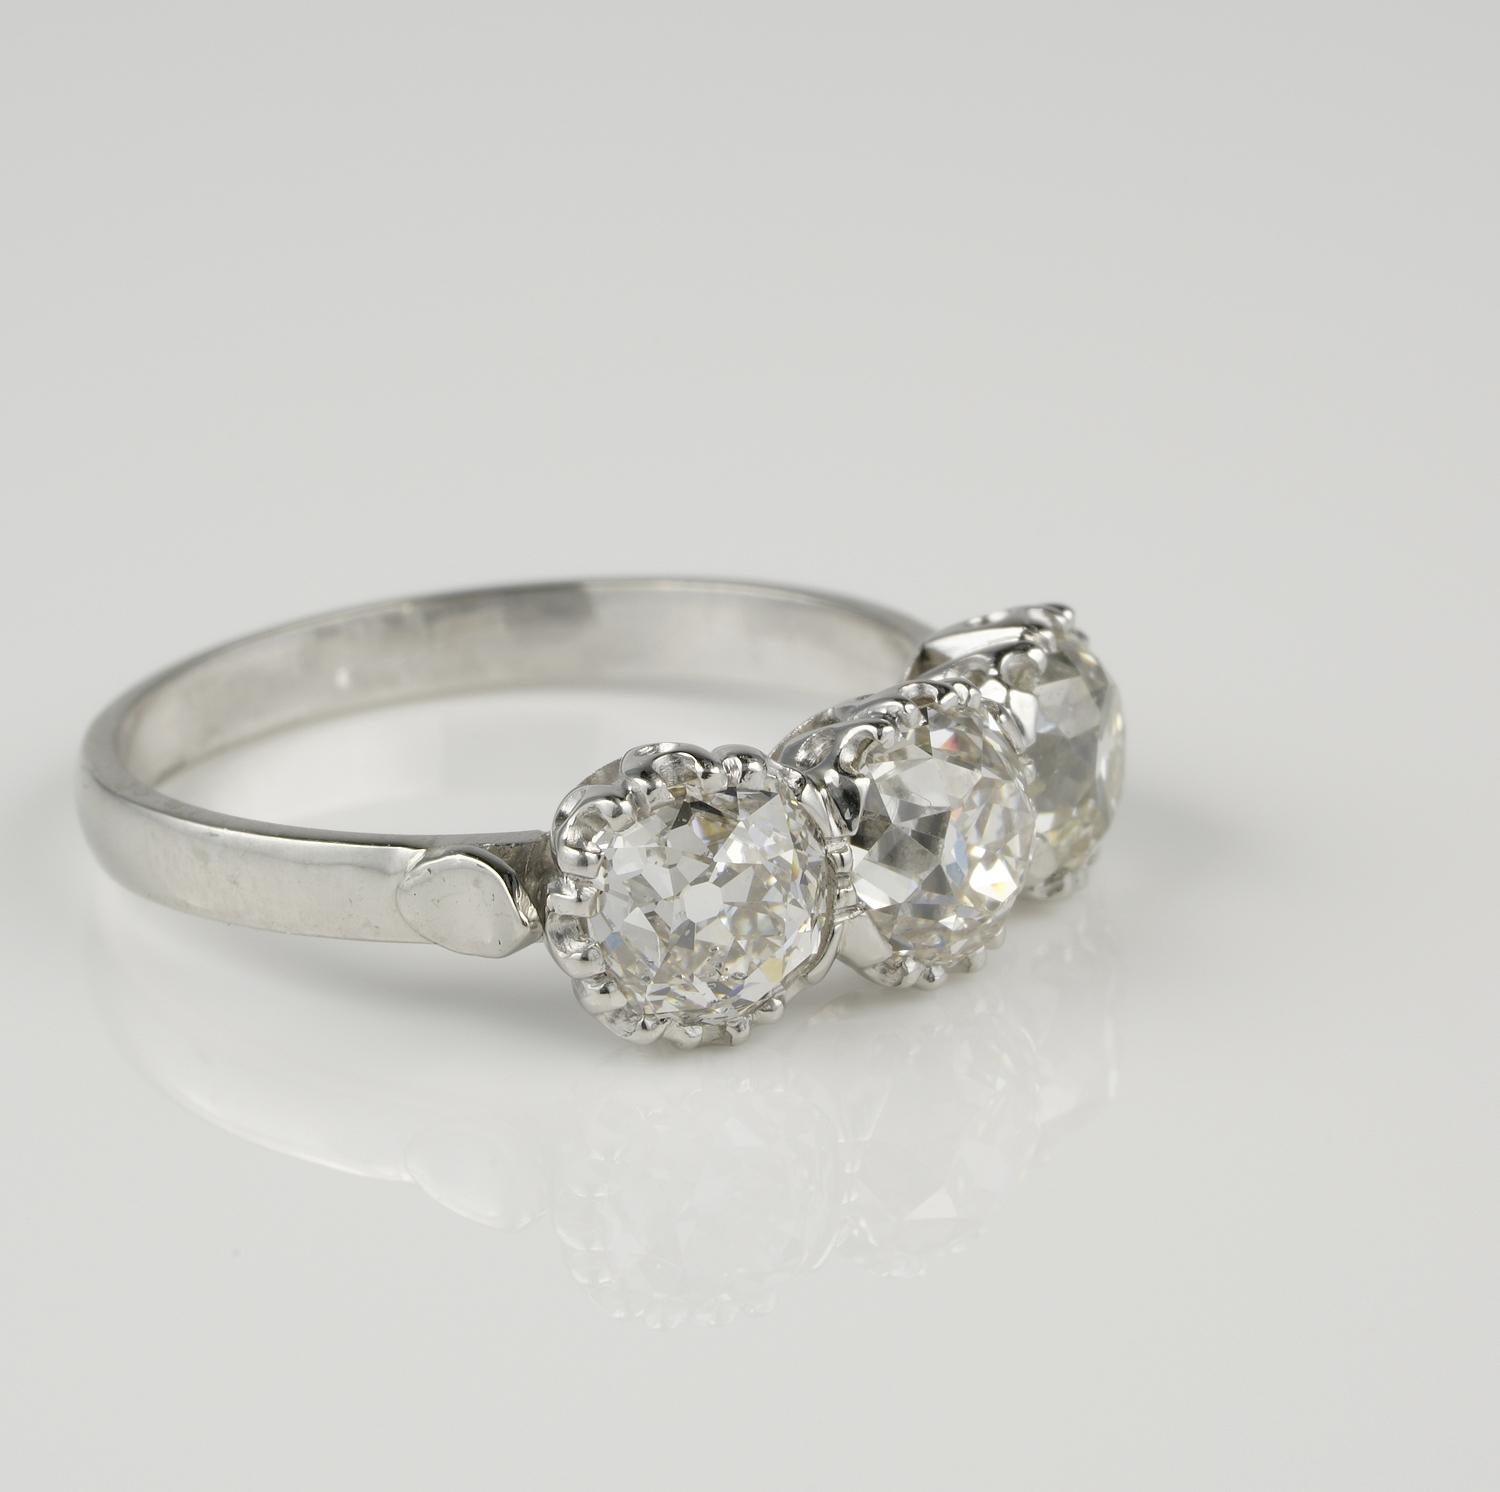 Be Mine!

Sensational Art Deco engagement or anniversary ring from the late 20's
Superbly hand crafted in solid Platinum ring, with a classy Trilogy setting finely presented for a life time statement ring
A trio of antique hand cut old mine Diamonds